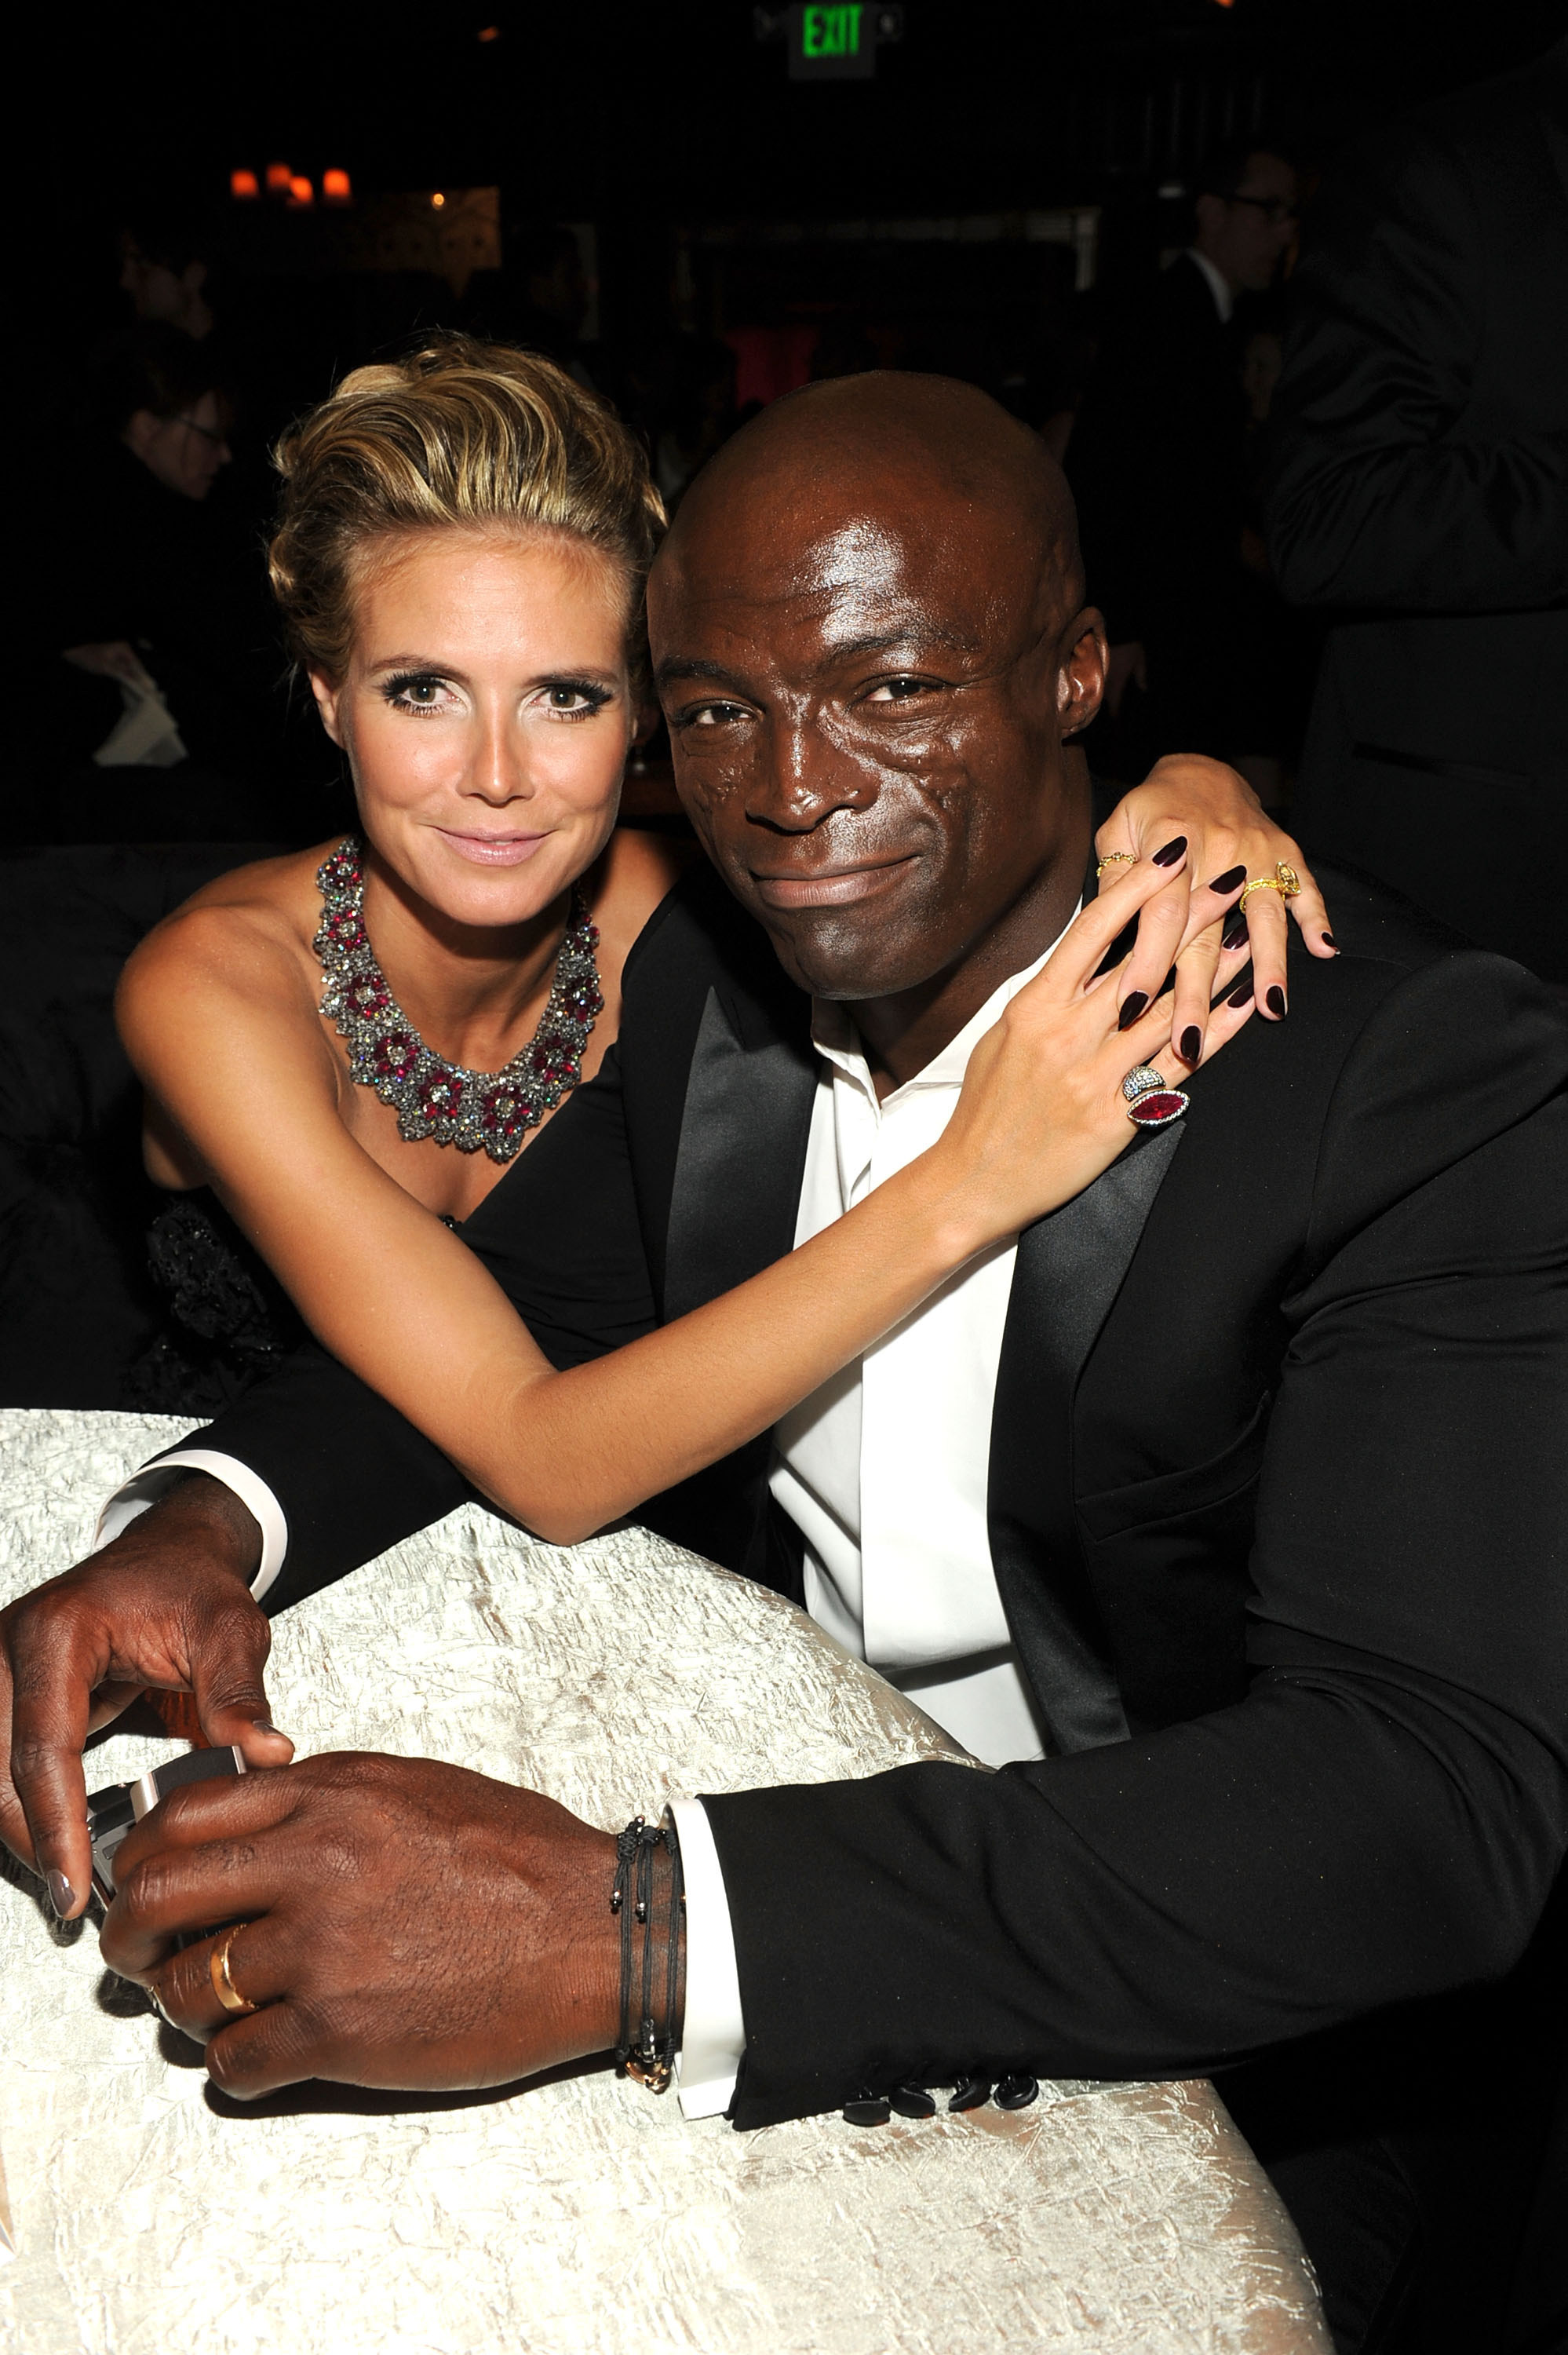 Heidi Klum and Seal at the Fox Broadcasting Company Twentieth Century Fox Television and FX 2010 Emmy Nominee Party on August 29, 2010, in Los Angeles, California. | Source: Getty Images